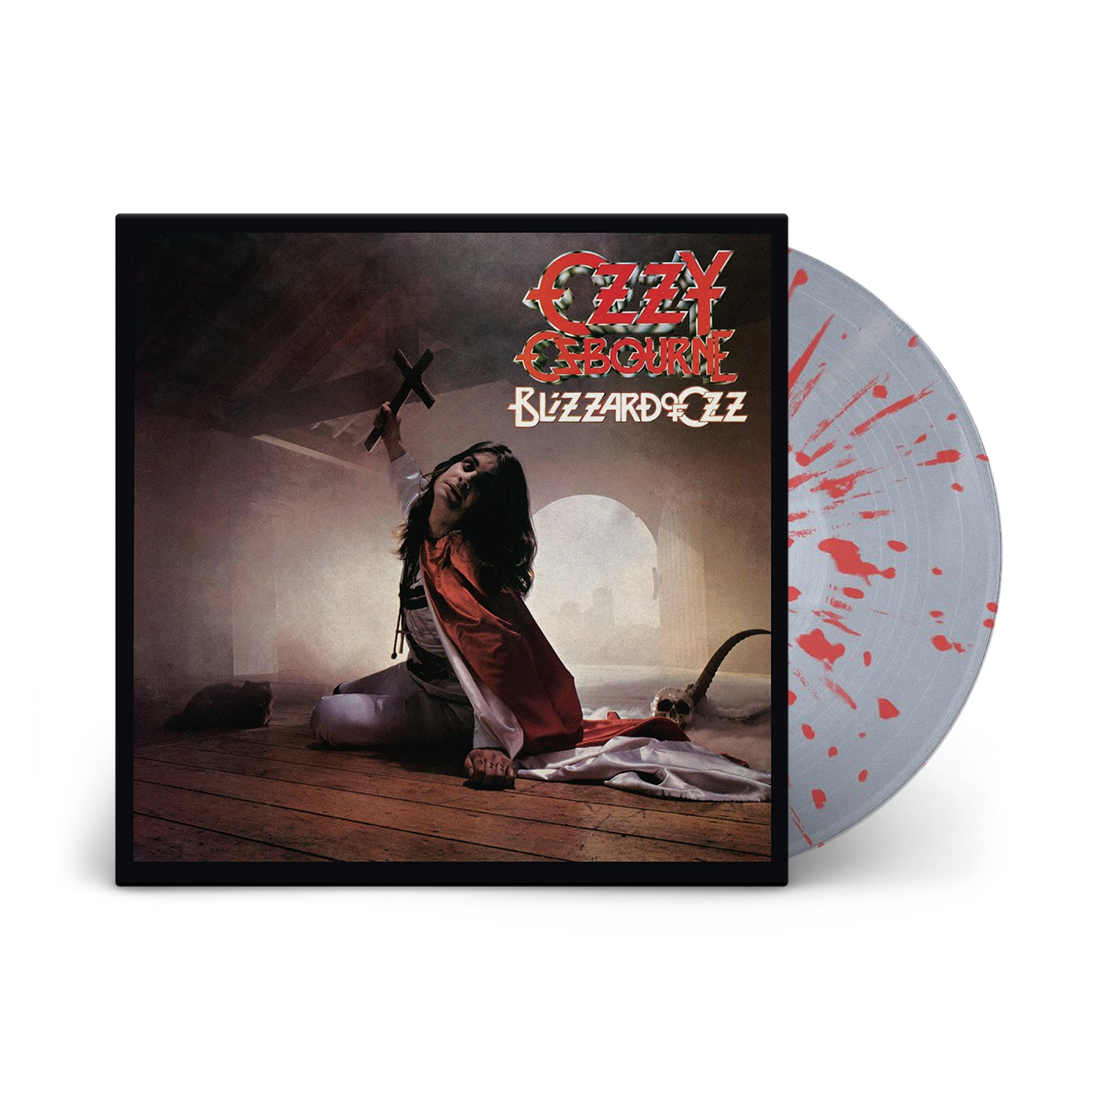 Blizzard of Oz: Limited Edition Silver + Red Swirl Vinyl LP